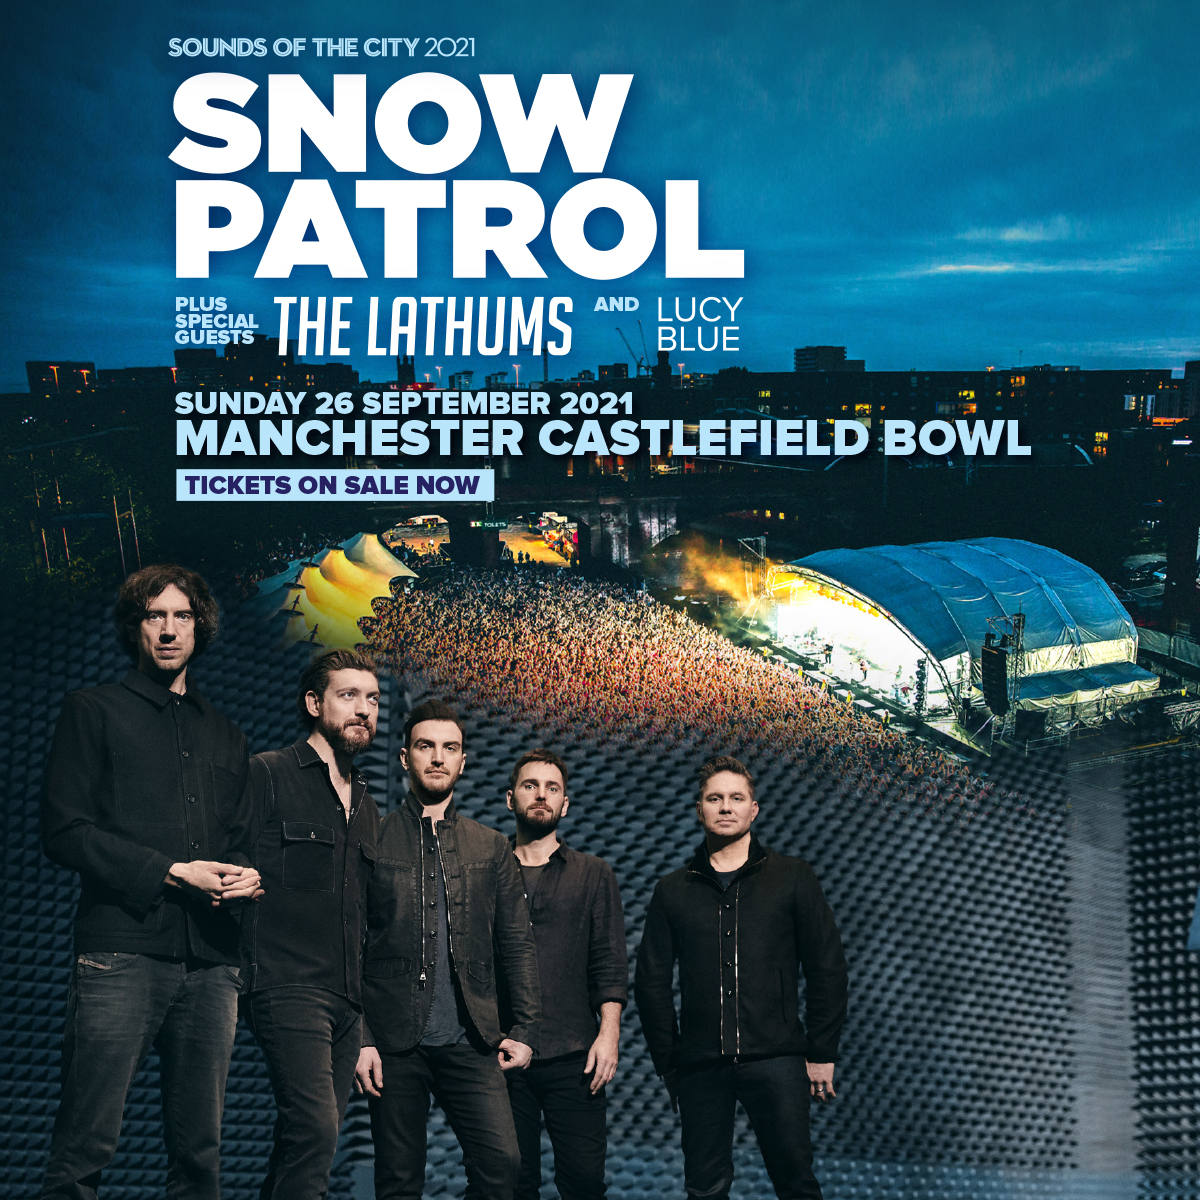 Sounds Of The City – Manchester Castlefield Bowl – tickets on general sale now!